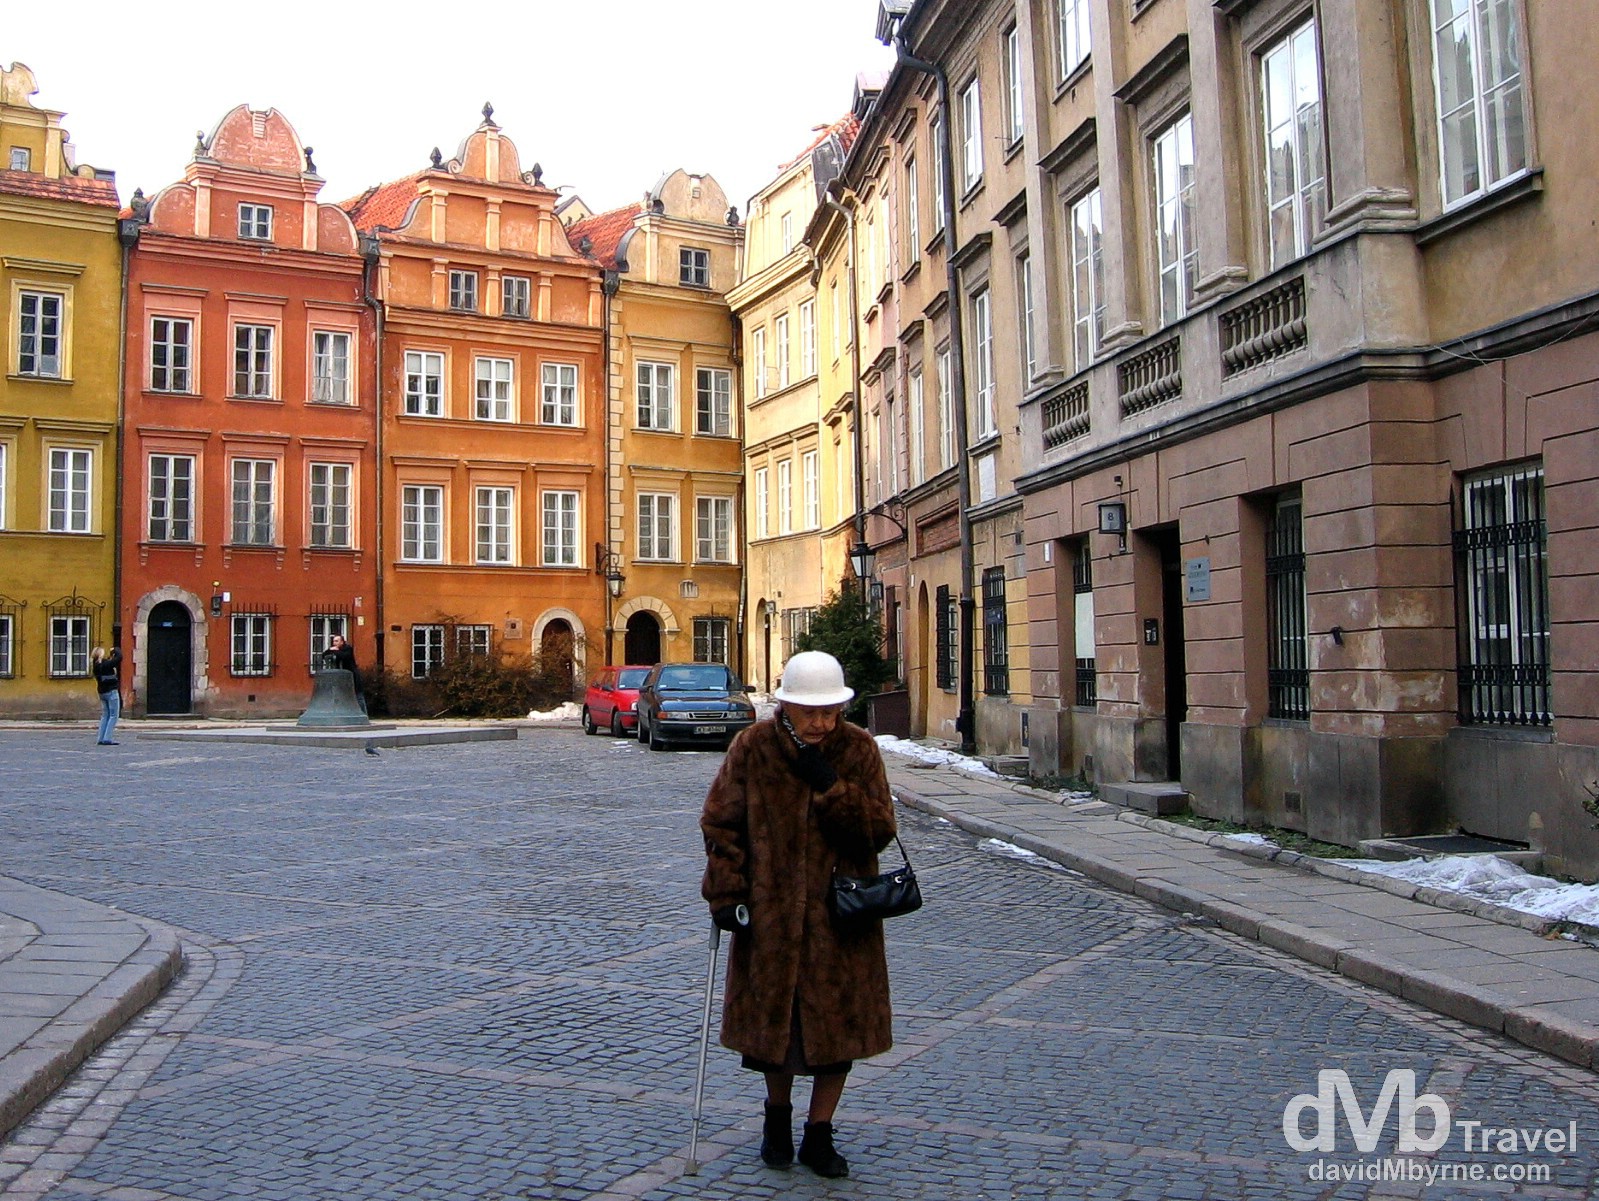 Walking on the restored, UNESCO listed streets of the Old Town district of Warsaw, Poland. March 5, 2006. 